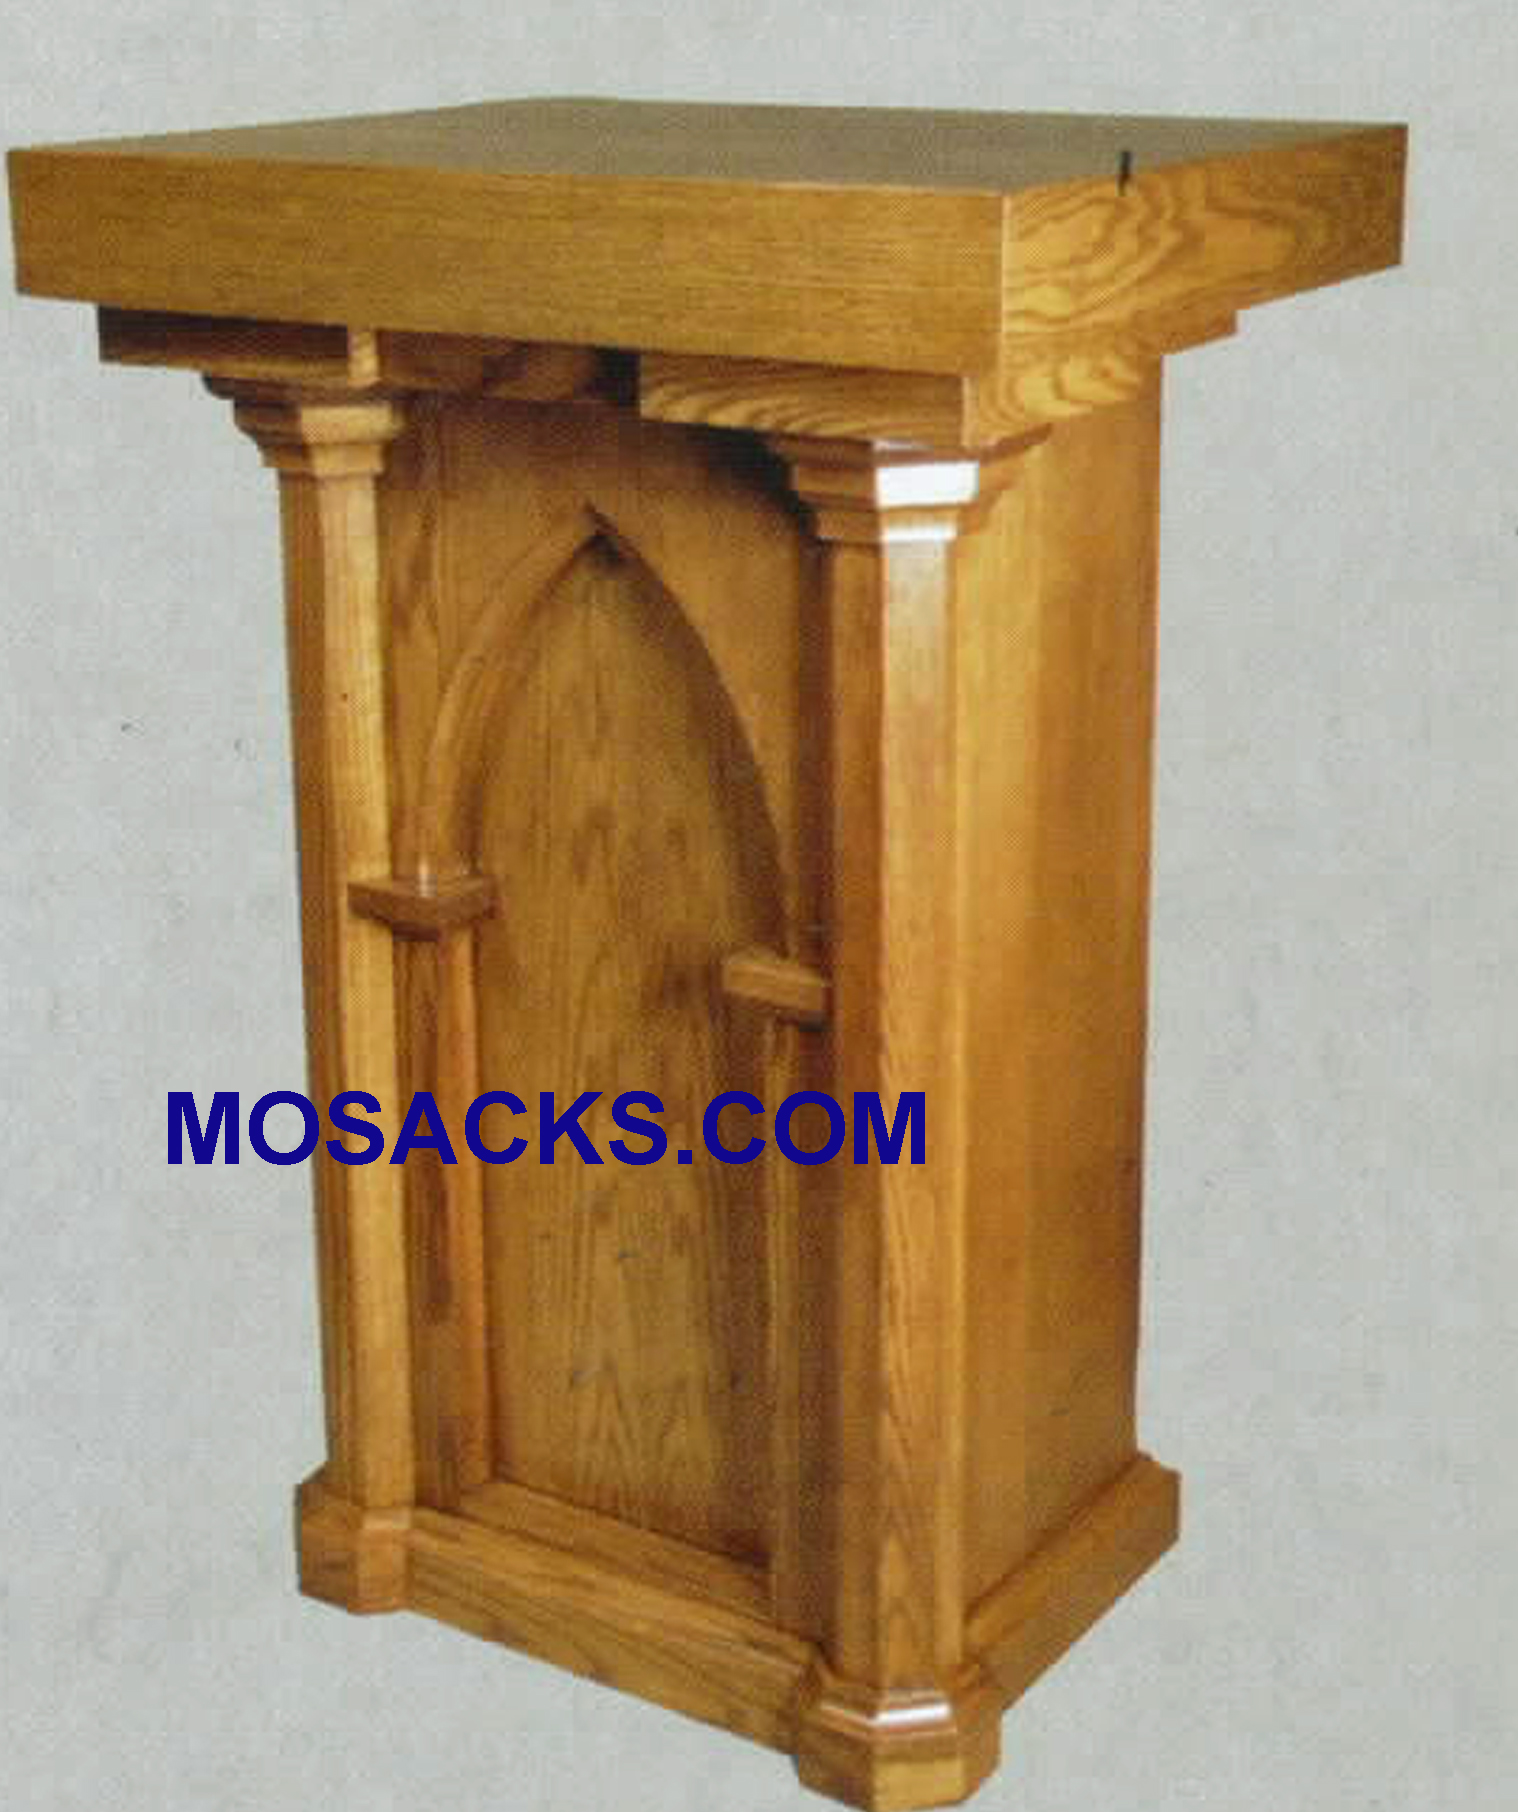 Tabernacle Stand 30" w x 24" d 42" h 534